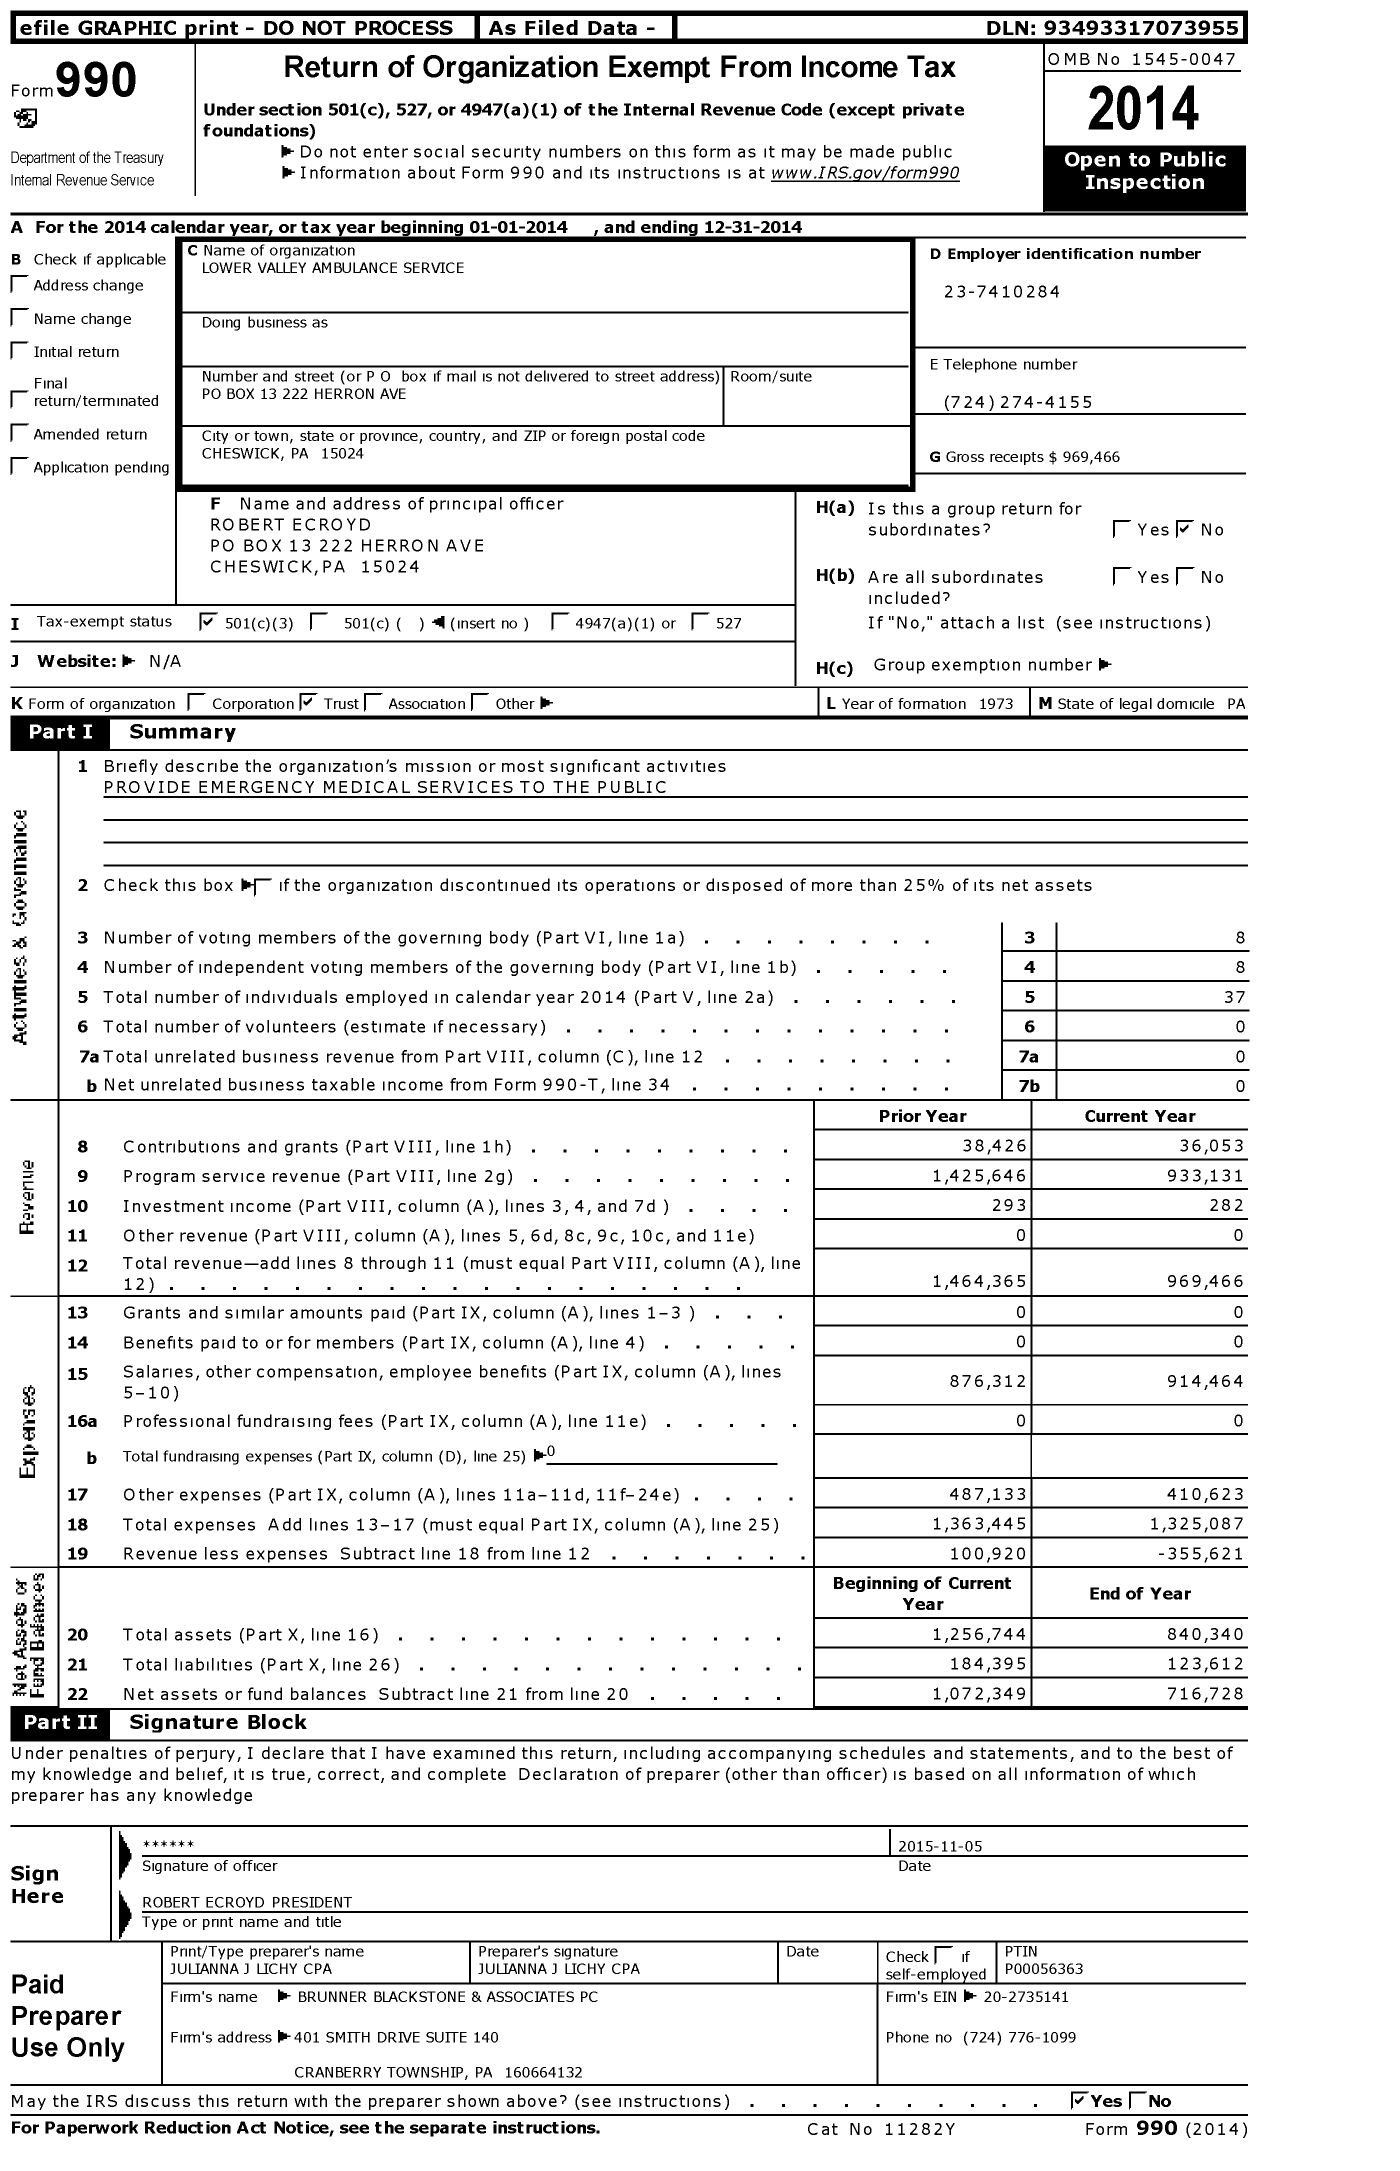 Image of first page of 2014 Form 990 for Lower Valley Ambulance Service